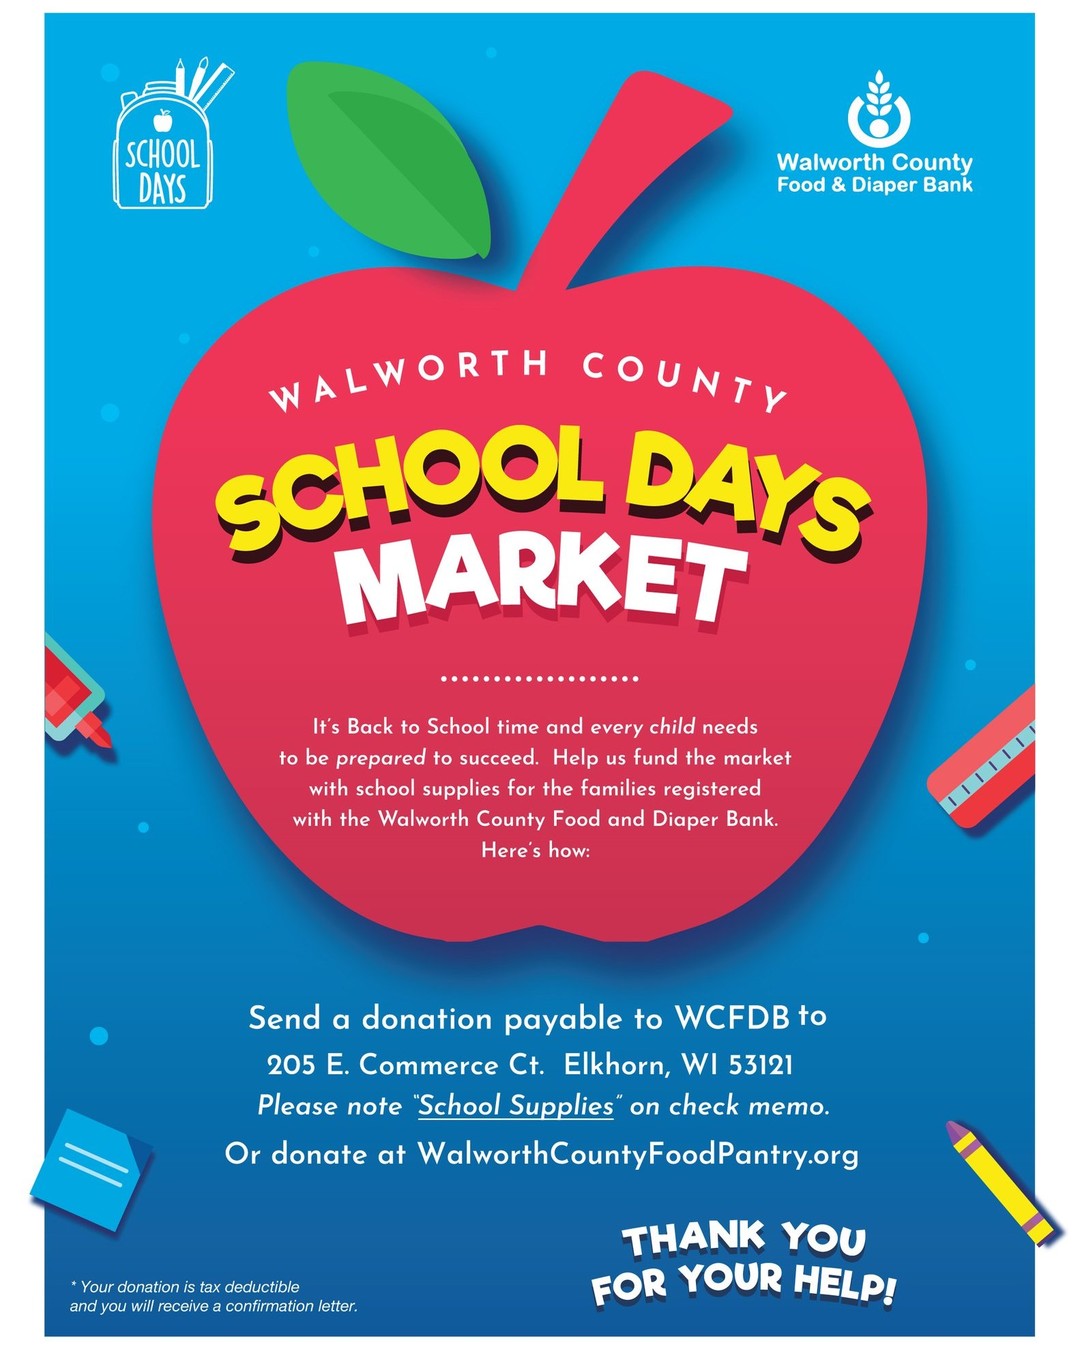 For their school days program, which provides school supplies for the families registered with the pantry, the Walworth County Food Pantry and Diaper Bank is getting ready.

Please consider helping to fund their mission. You can send a check payable to w WCFDB to 205 E. Commerce Ct.  Elkhorn, WI 53121, with "school supplies" noted in the check memo.
 
Or donate at WalworthCountyFoodPantry.org

Thank you for your help!

#GLWA #SharePost